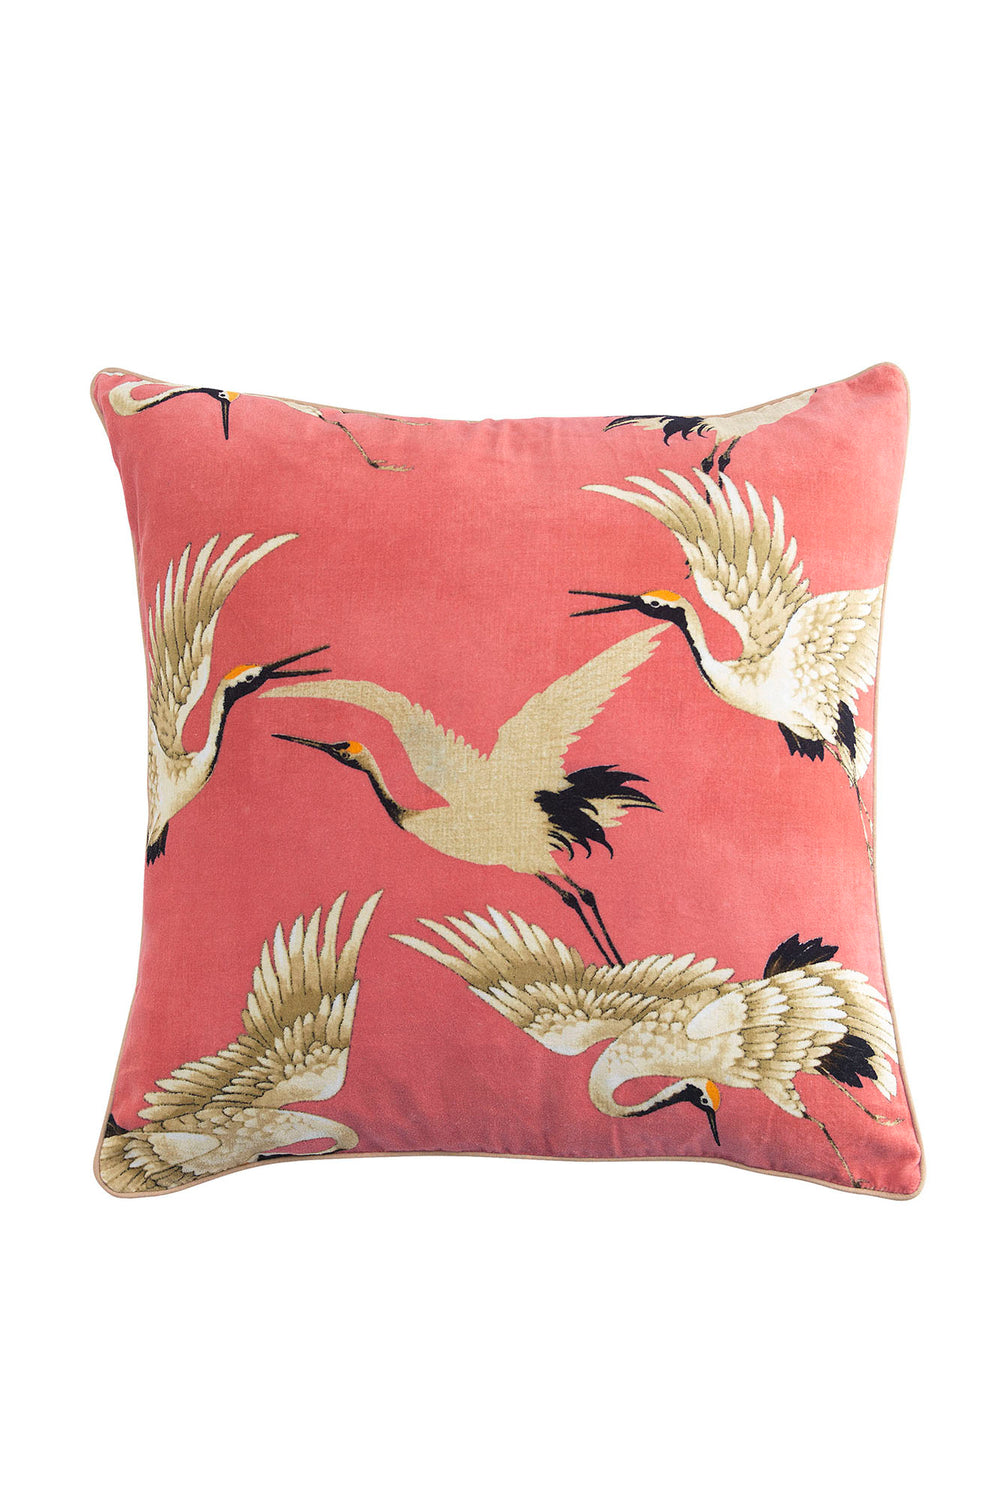 One Hundred Stars Stork Crane Lipstick Pink Square Velvet Cushion - These limited edition velvet cushions are 50cm x 50cm and can purchased with or without an ethically sourced duck feather inner. 